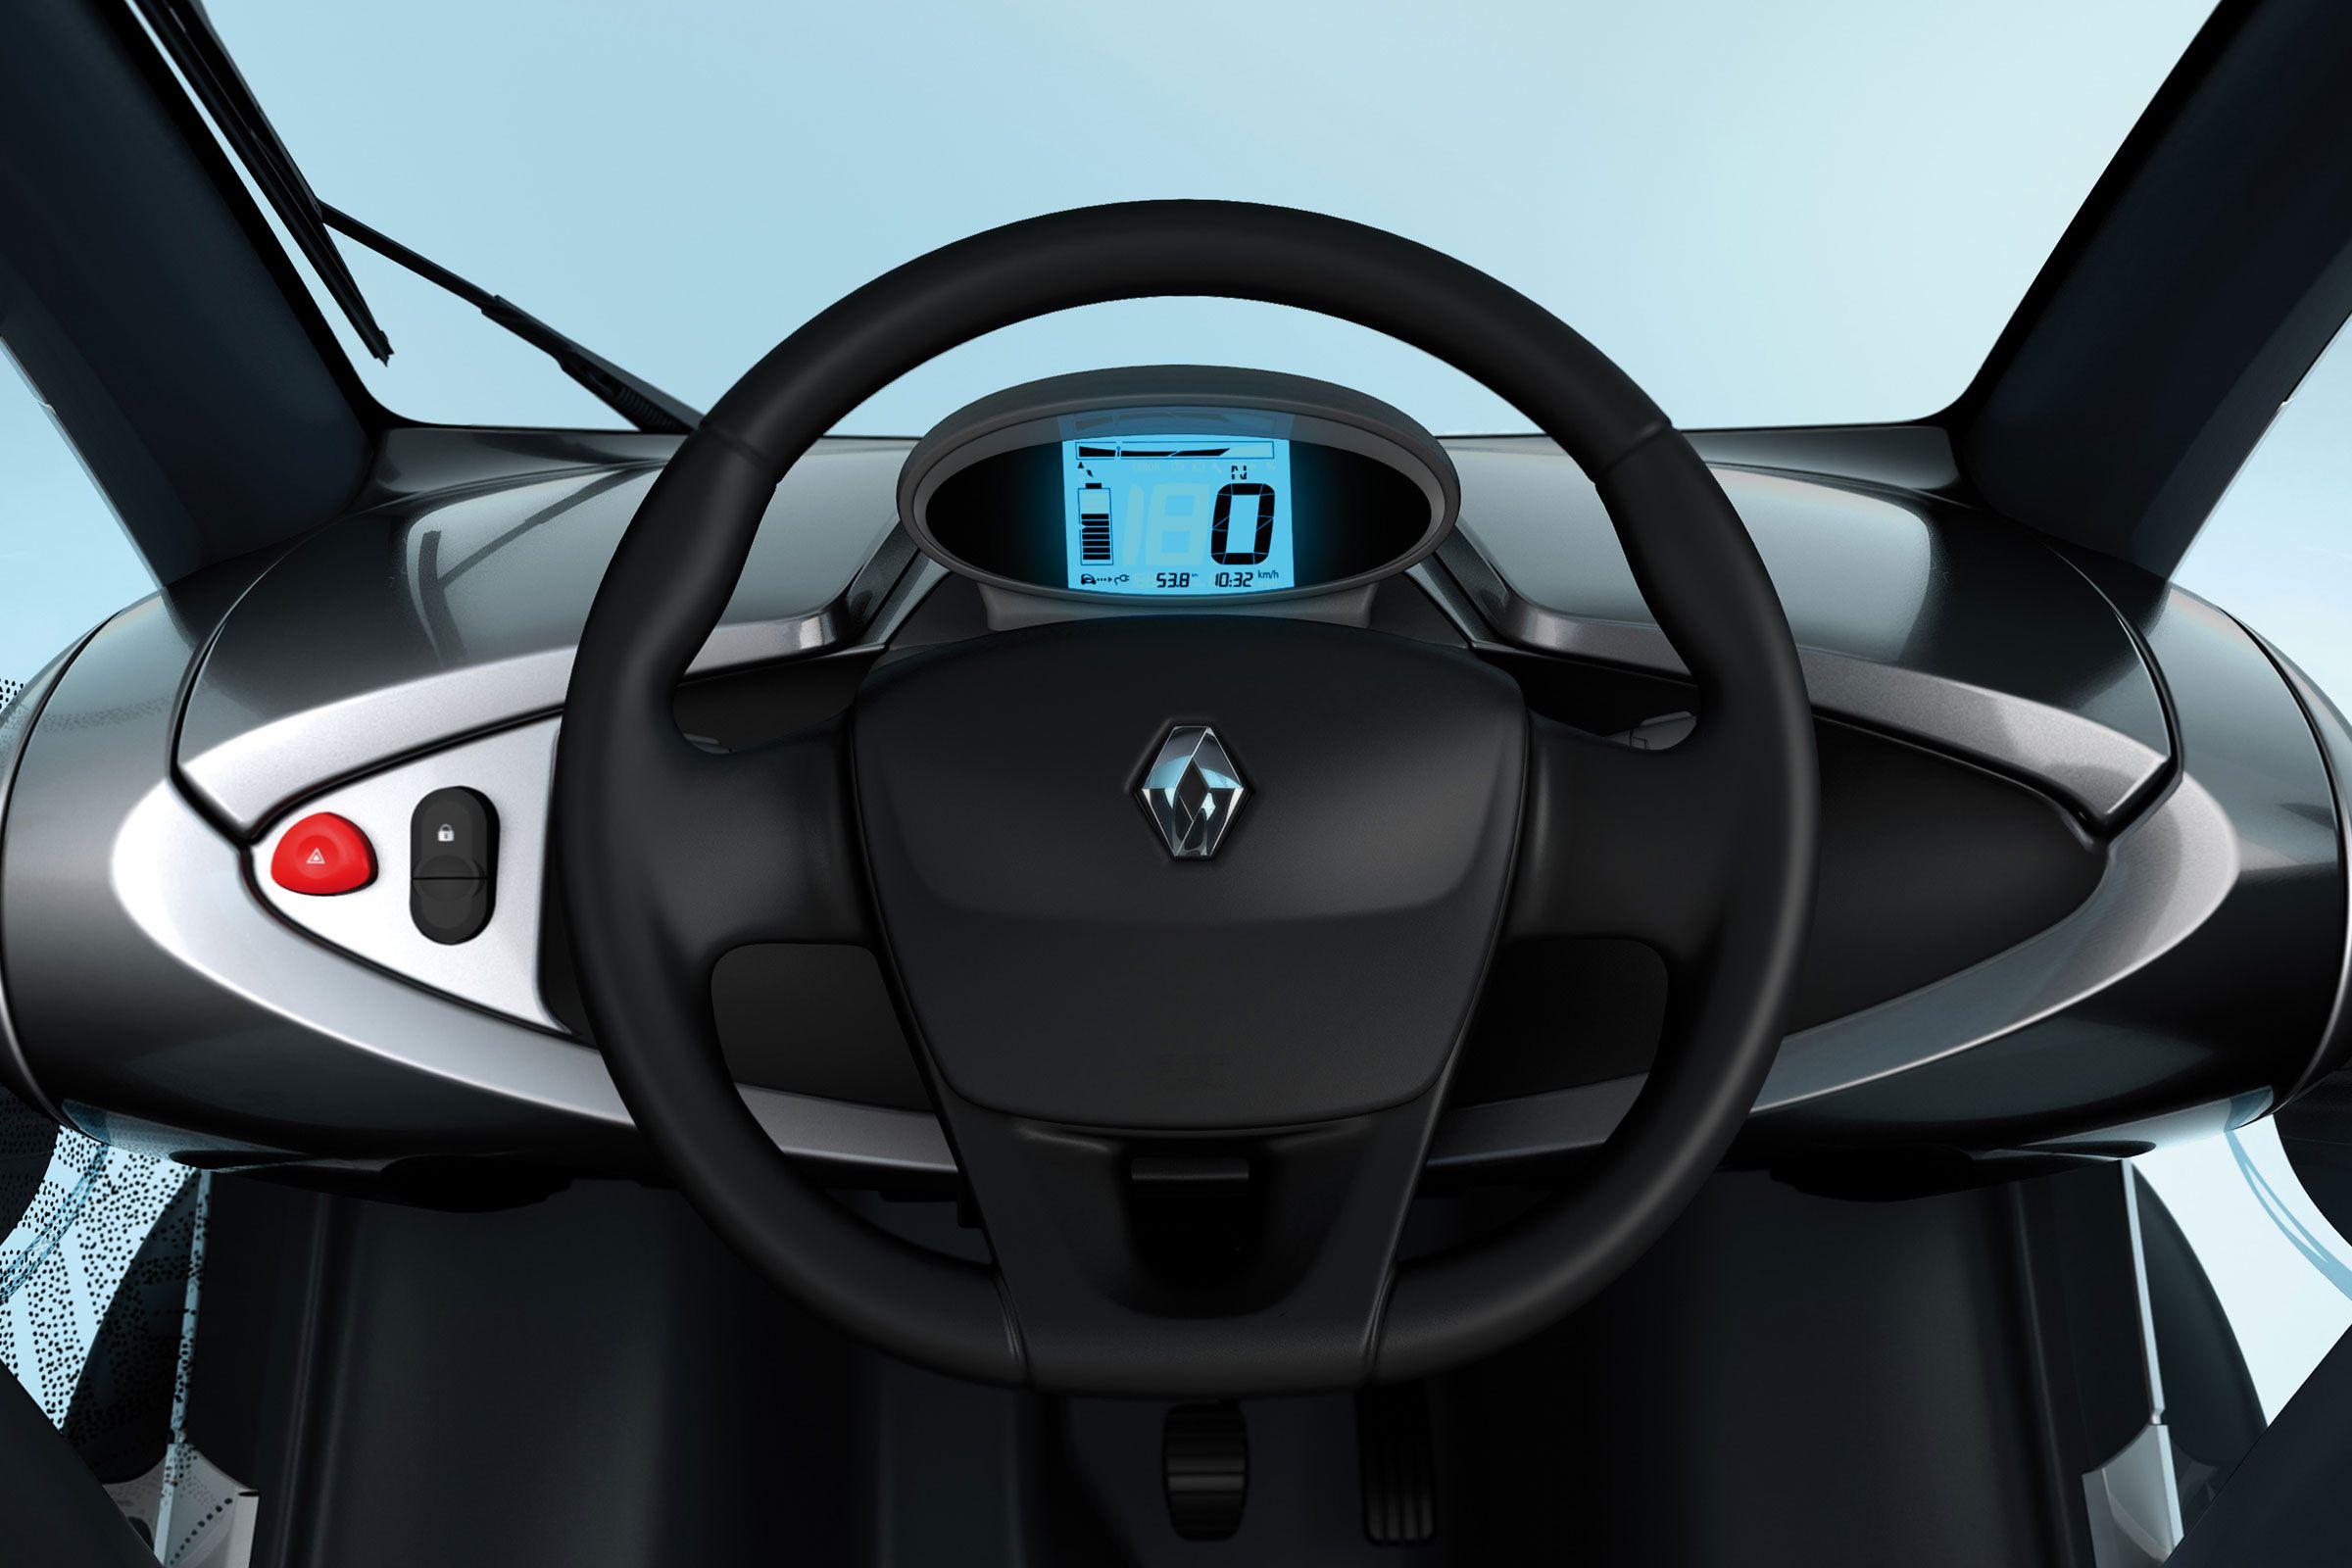 Inside of the Twizy